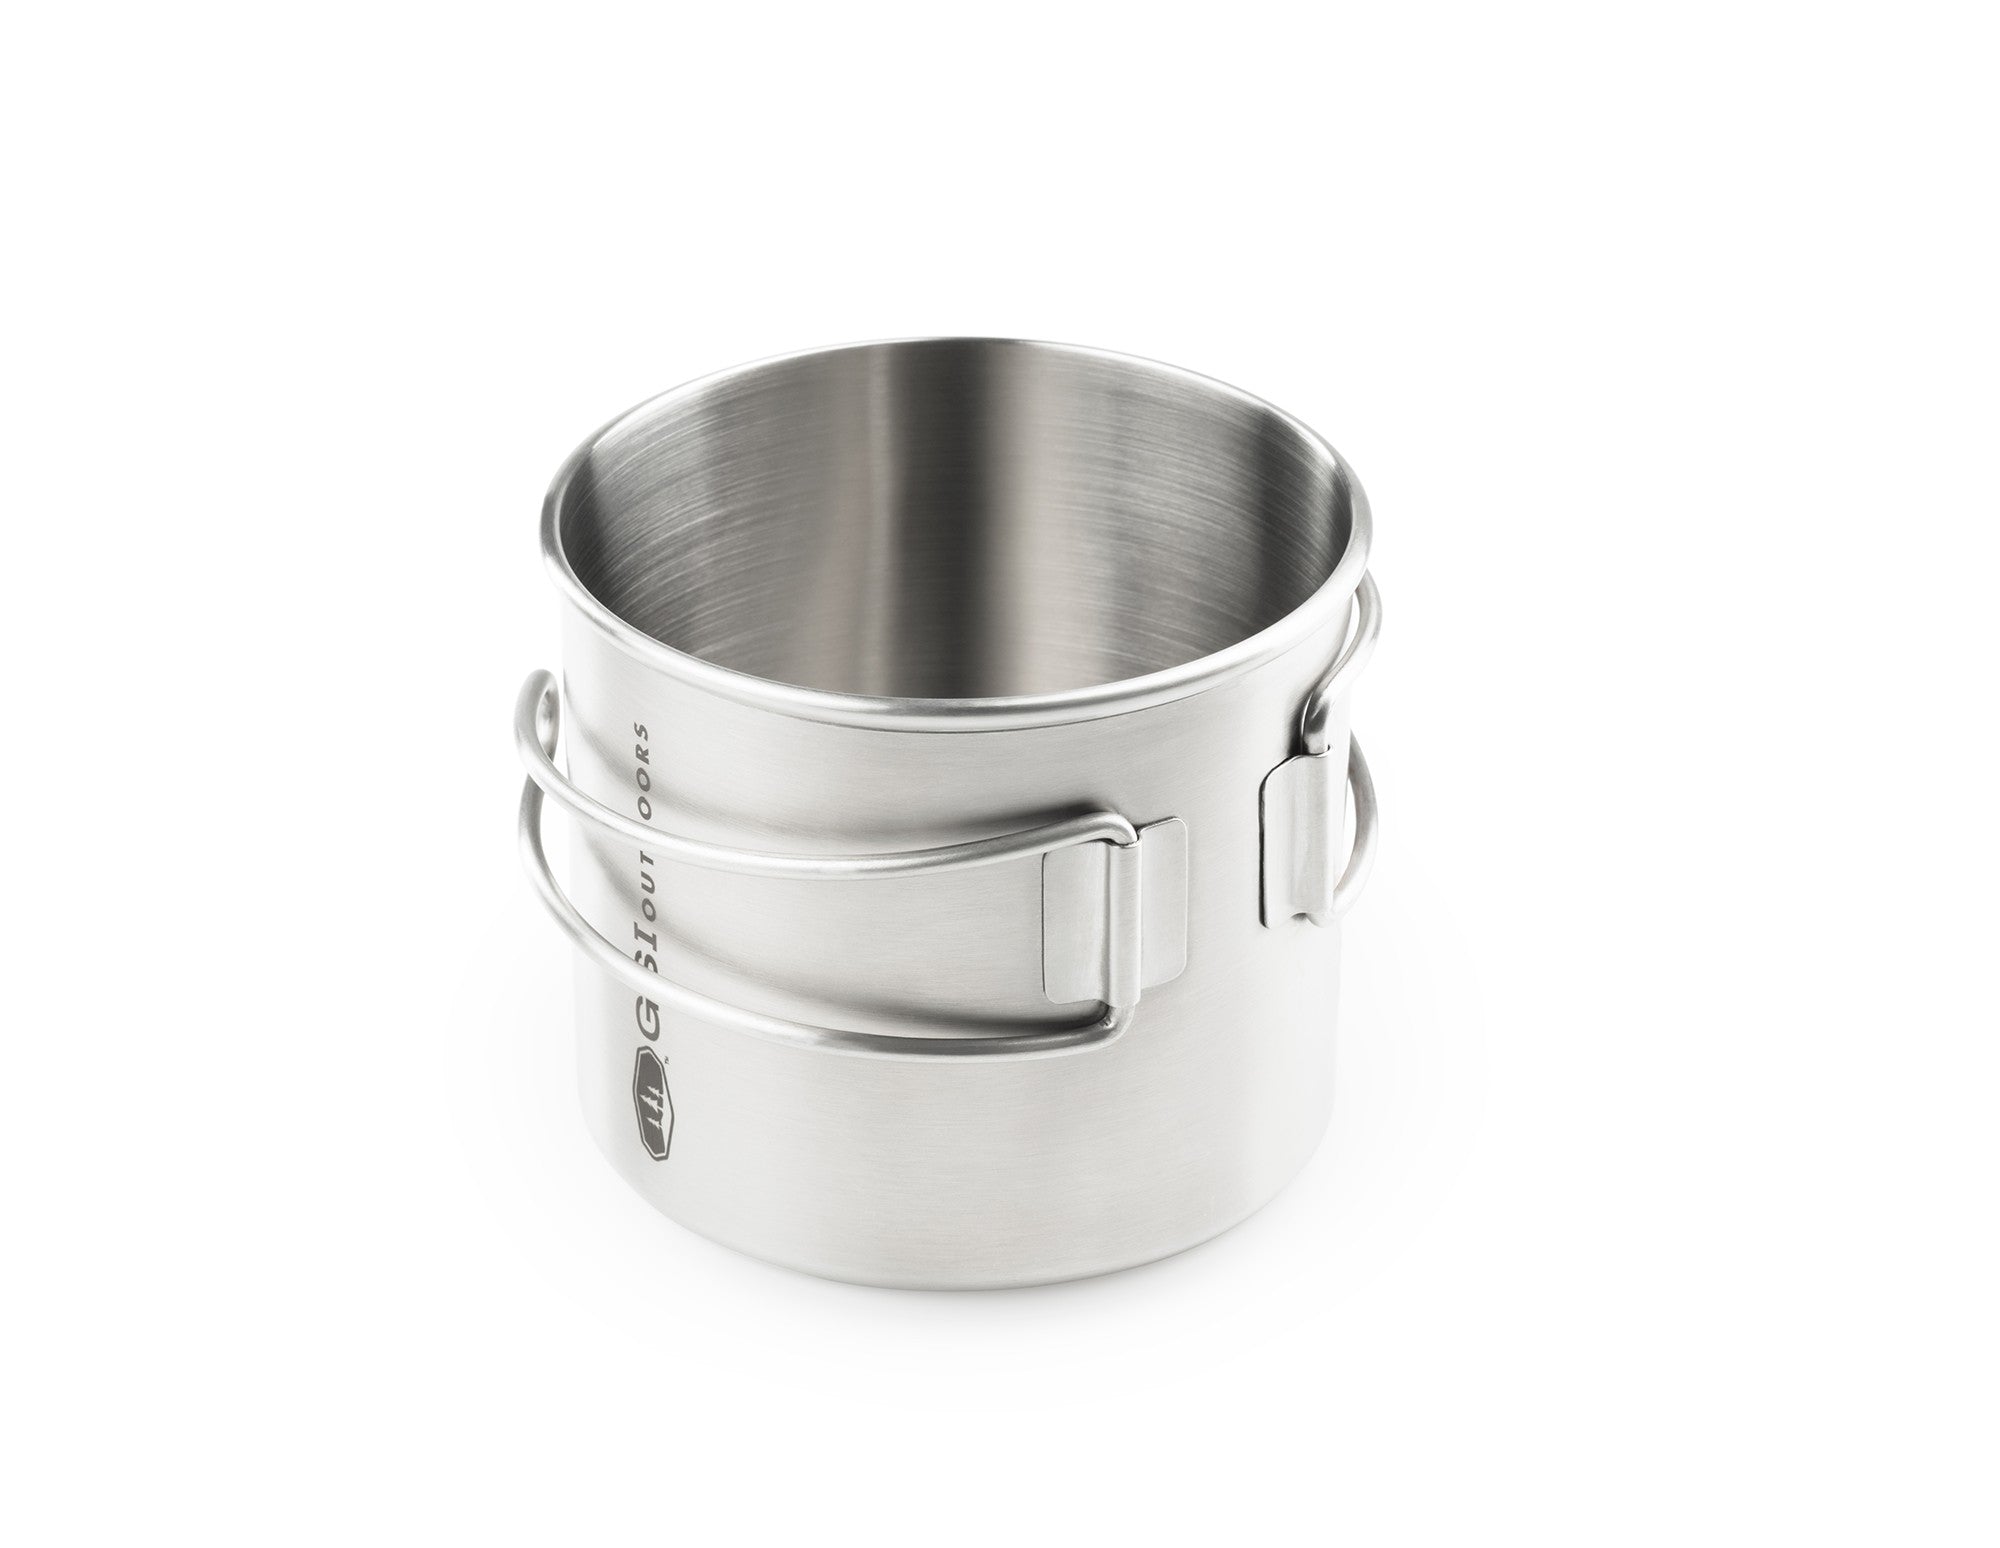 Glacier Stainless Backpacking Cup | GSI Outdoors